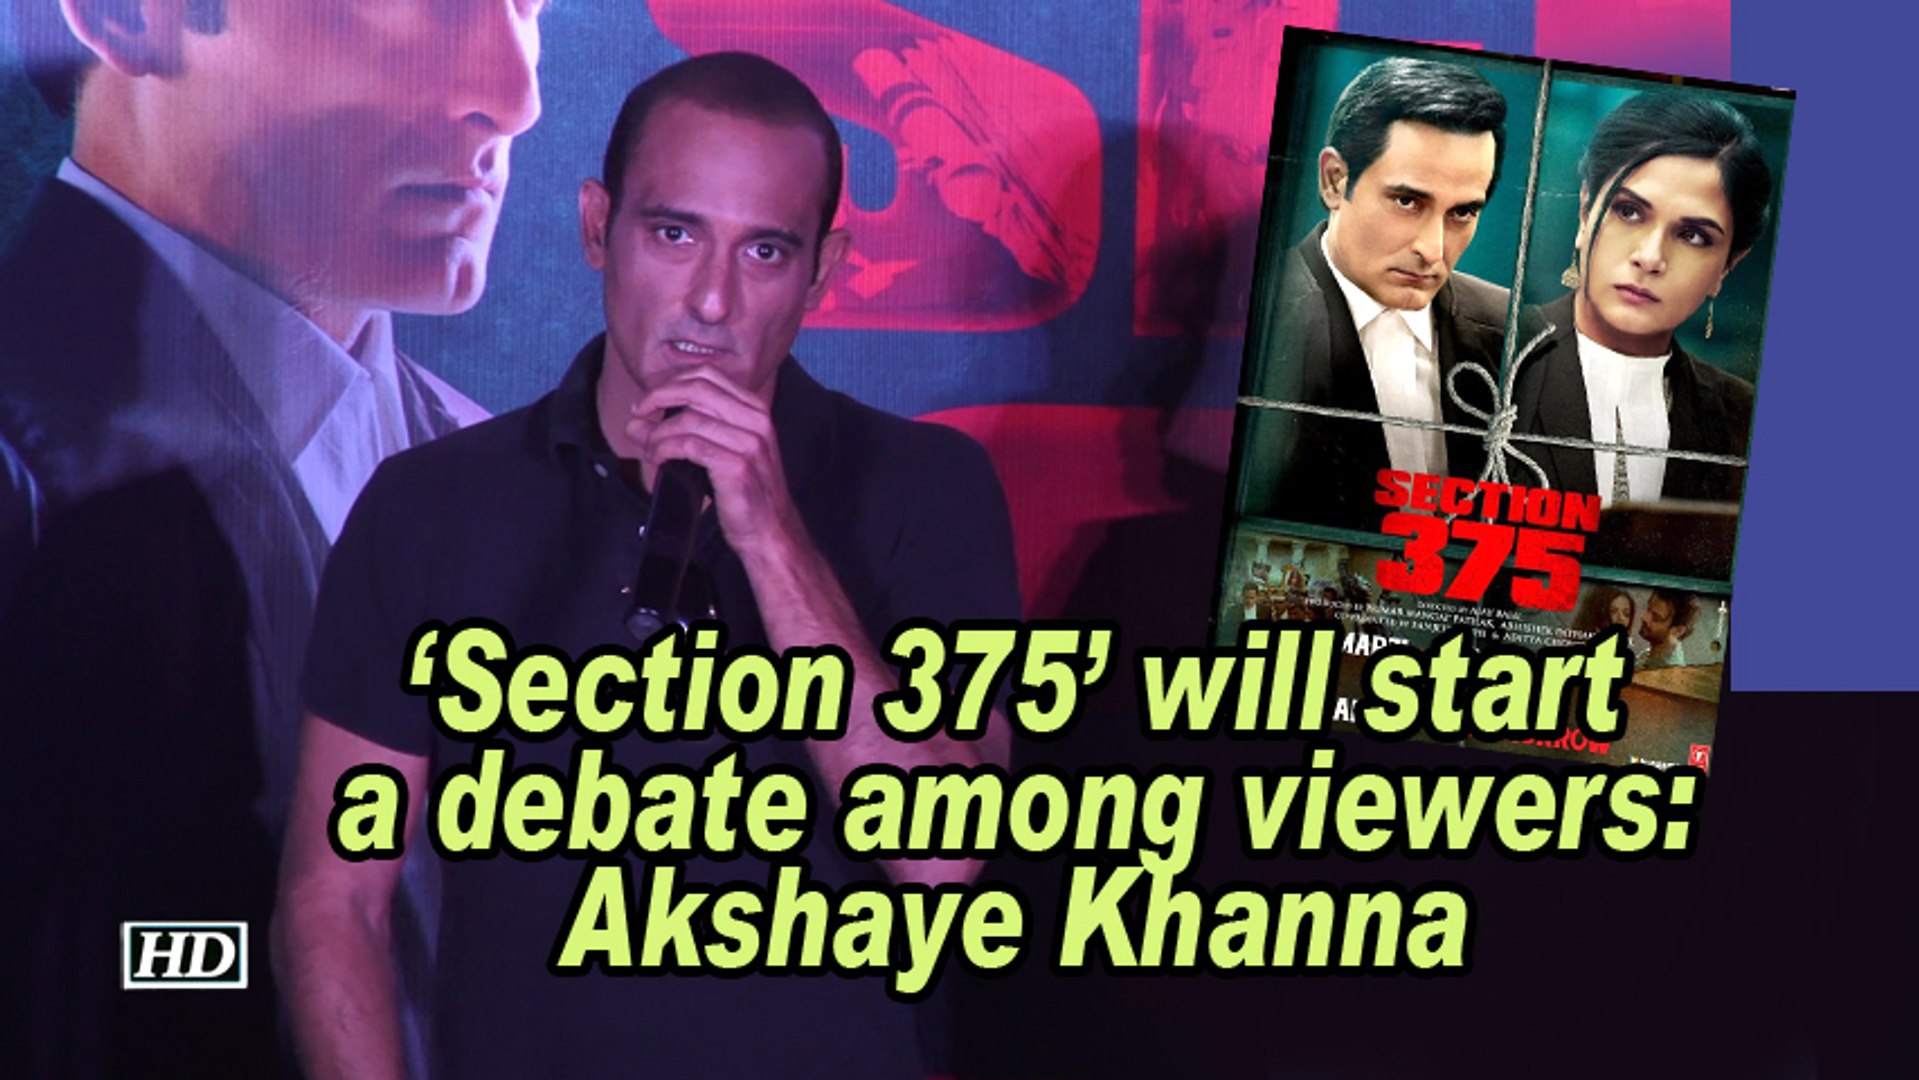 download section 375 full movie in 720 p 480p 1080p filmyzilla 